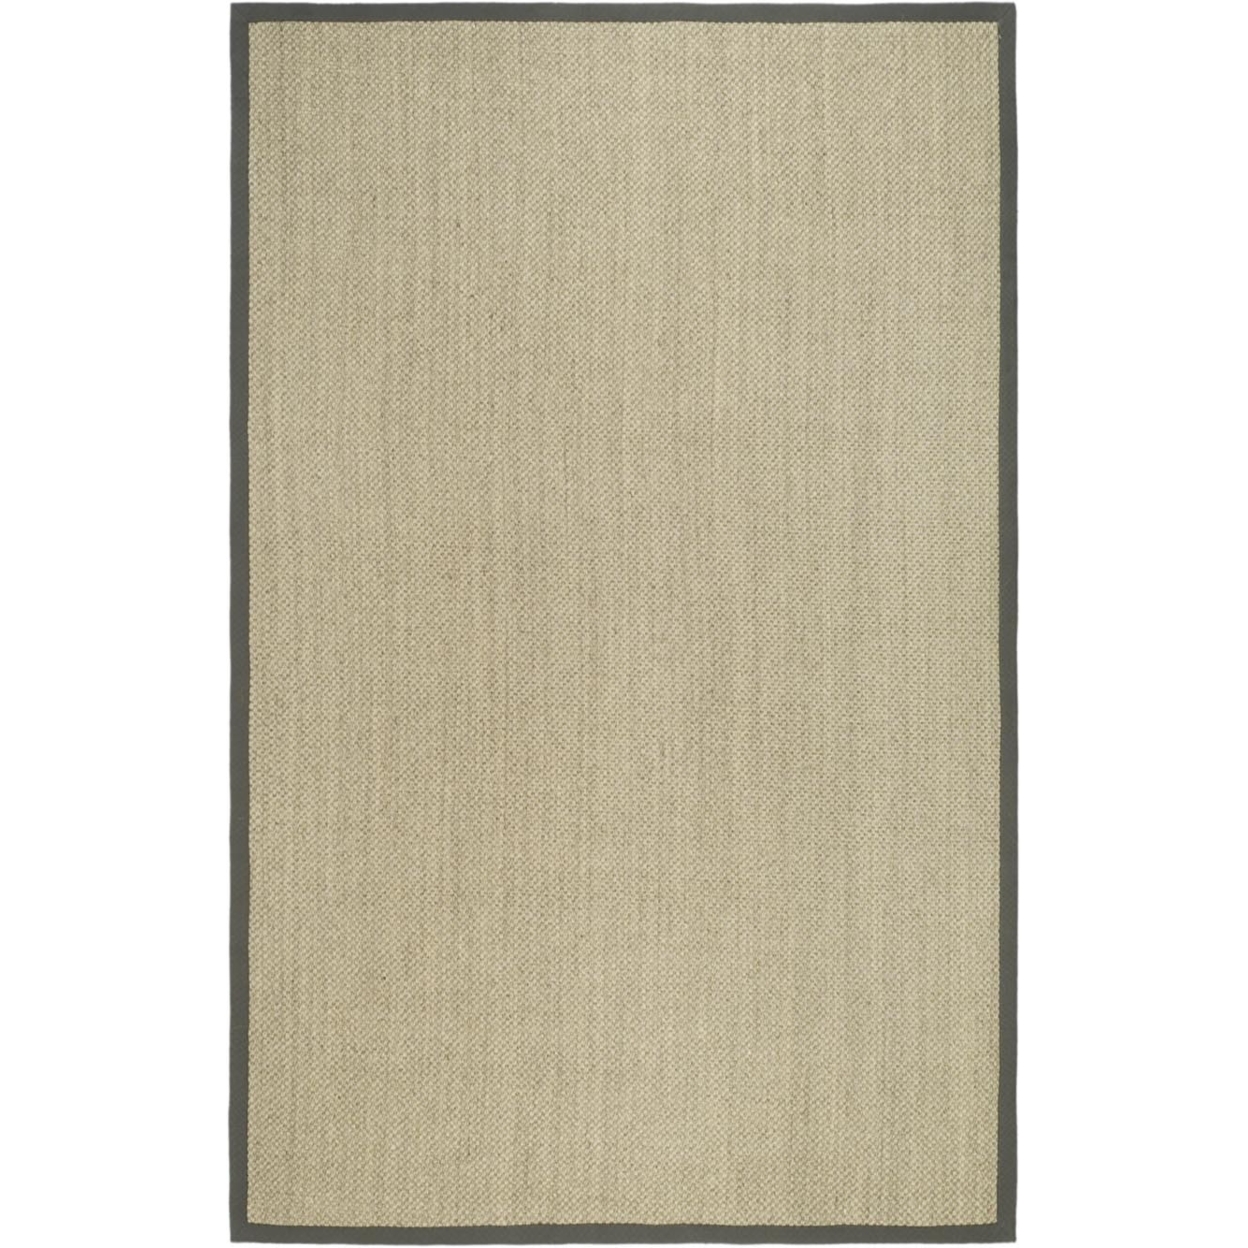 SAFAVIEH Natural Fiber Collection NF443B Marble/Grey Rug - 6' X 9'